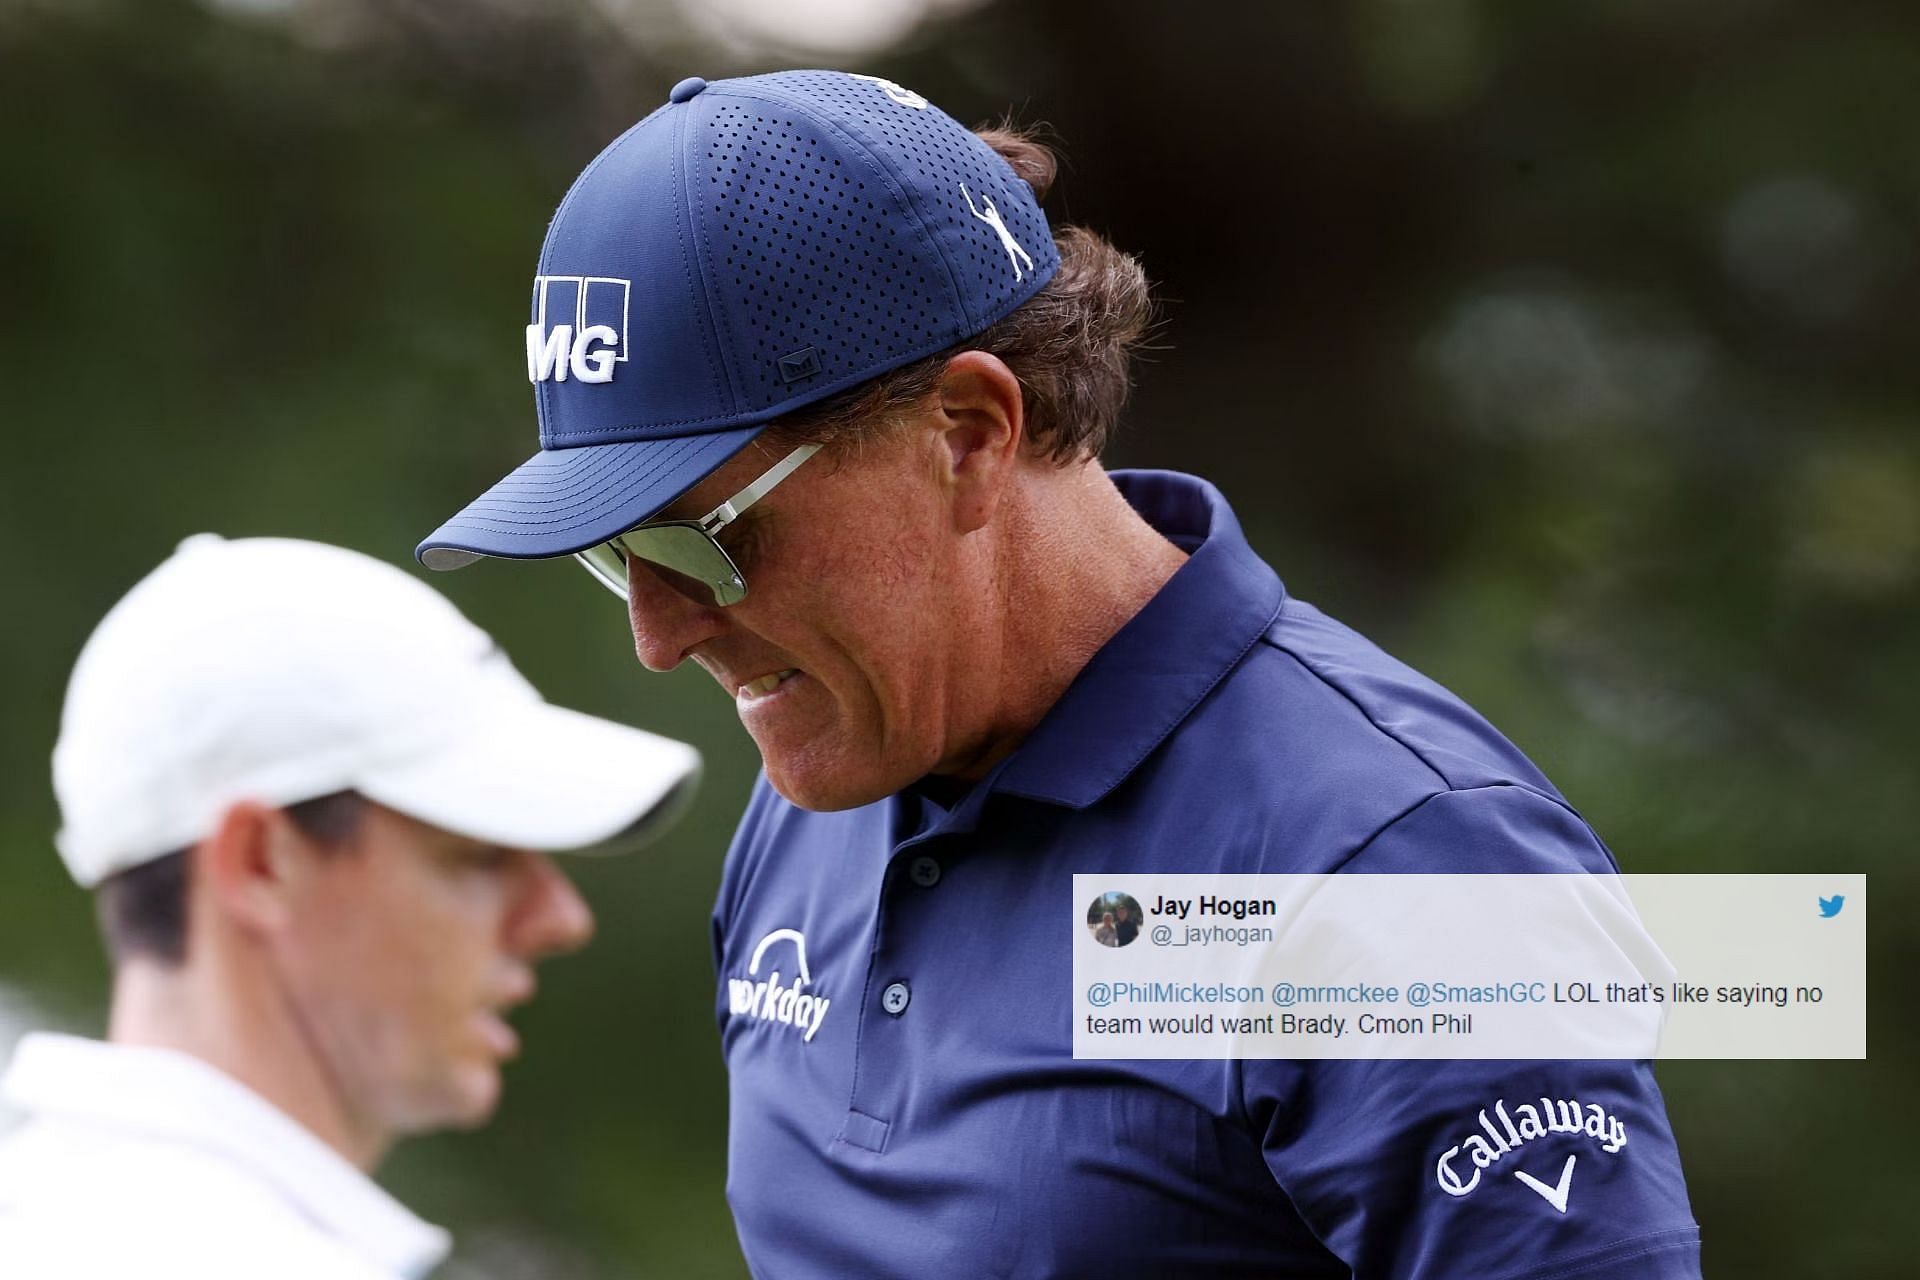 Phil Mickelson and Rory McIlroy at Travelers Championship - Round Two